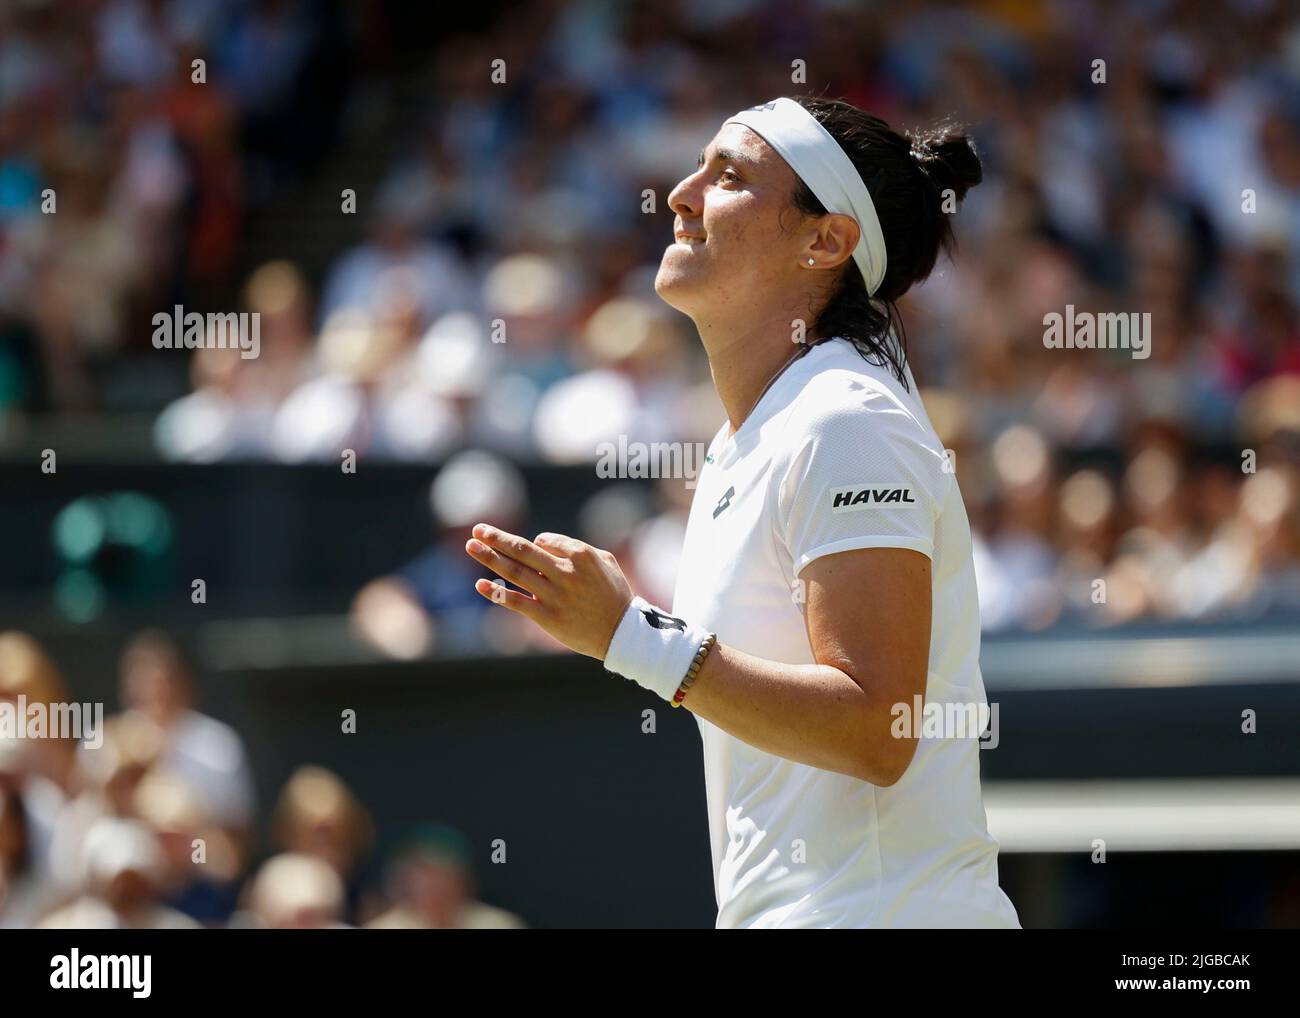 Wimbledon,Great Britain 9th. July, 2022. Tunisian  tennis player Ons Jabeur in action  at the Wimbledon 2022  Championships on Saturday 09 June 2022.,  © Juergen Hasenkopf / Alamy Live News Stock Photo